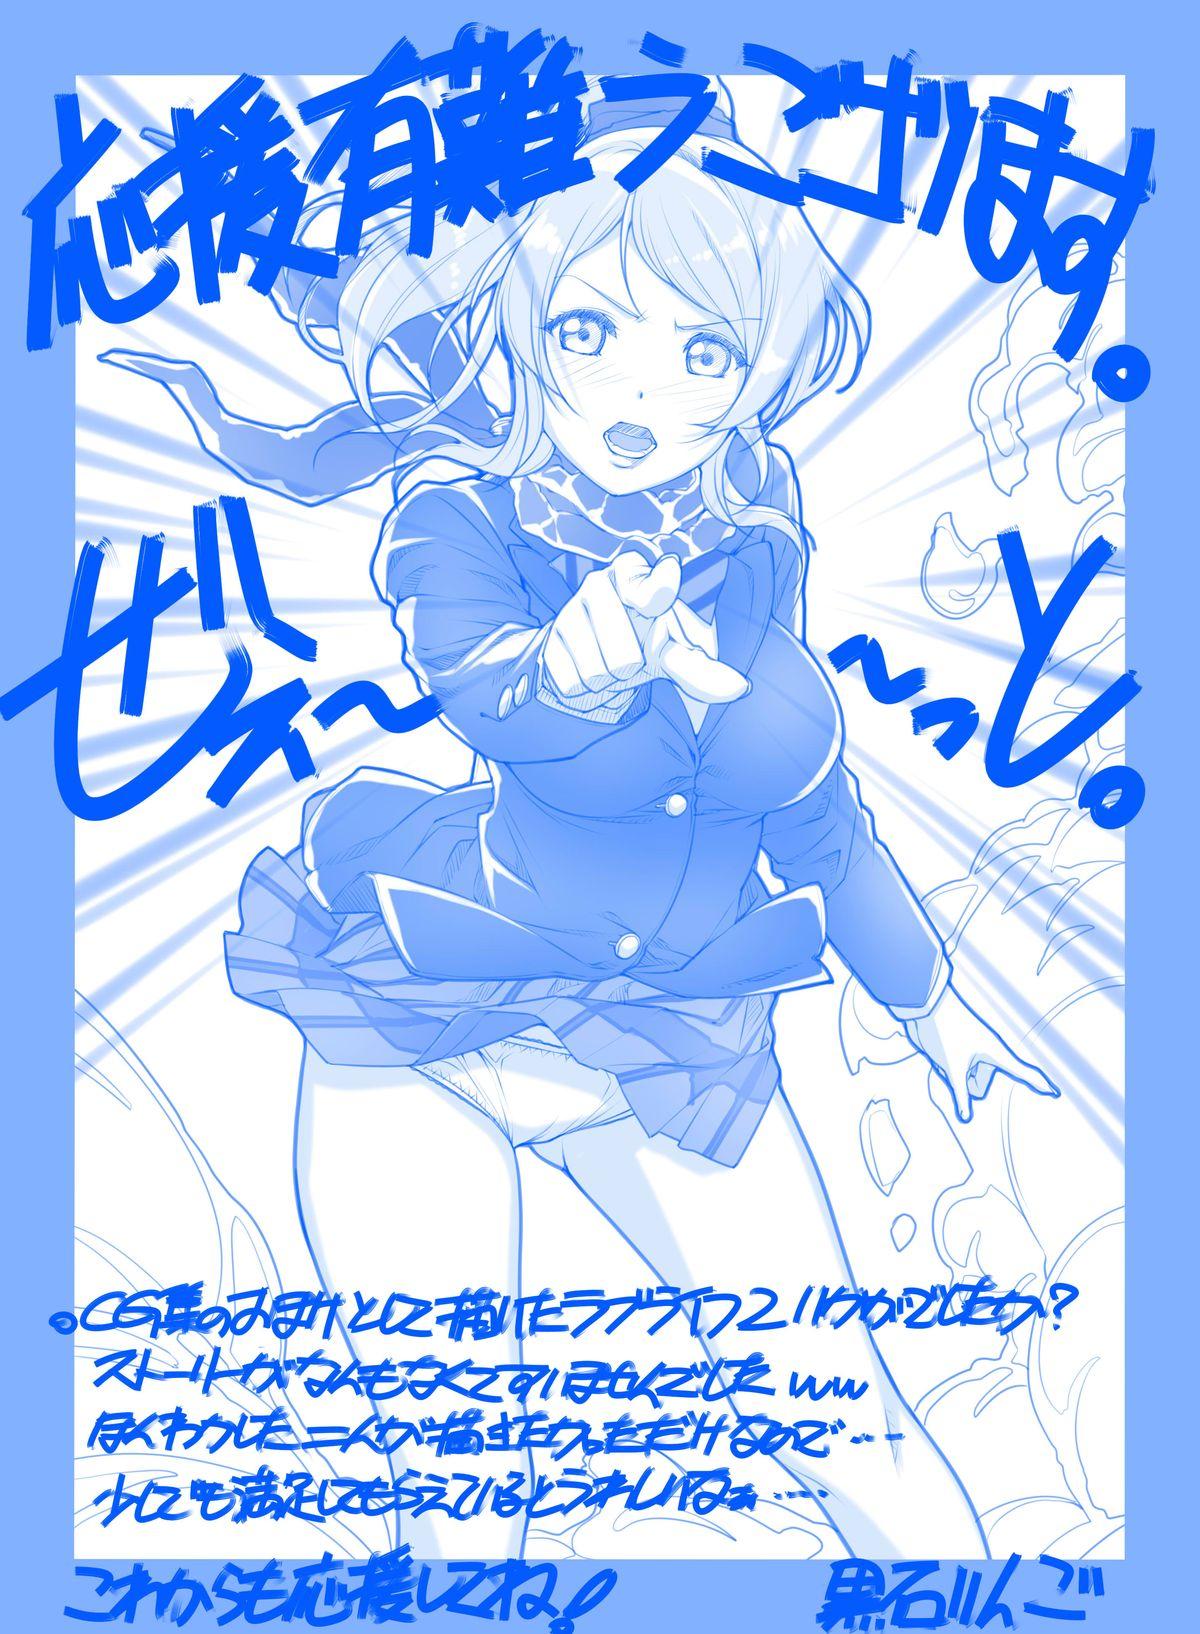 Sola Illustration Requests & Love Life! 2 - Love live Gundam build fighters Celebrity Nudes - Page 36